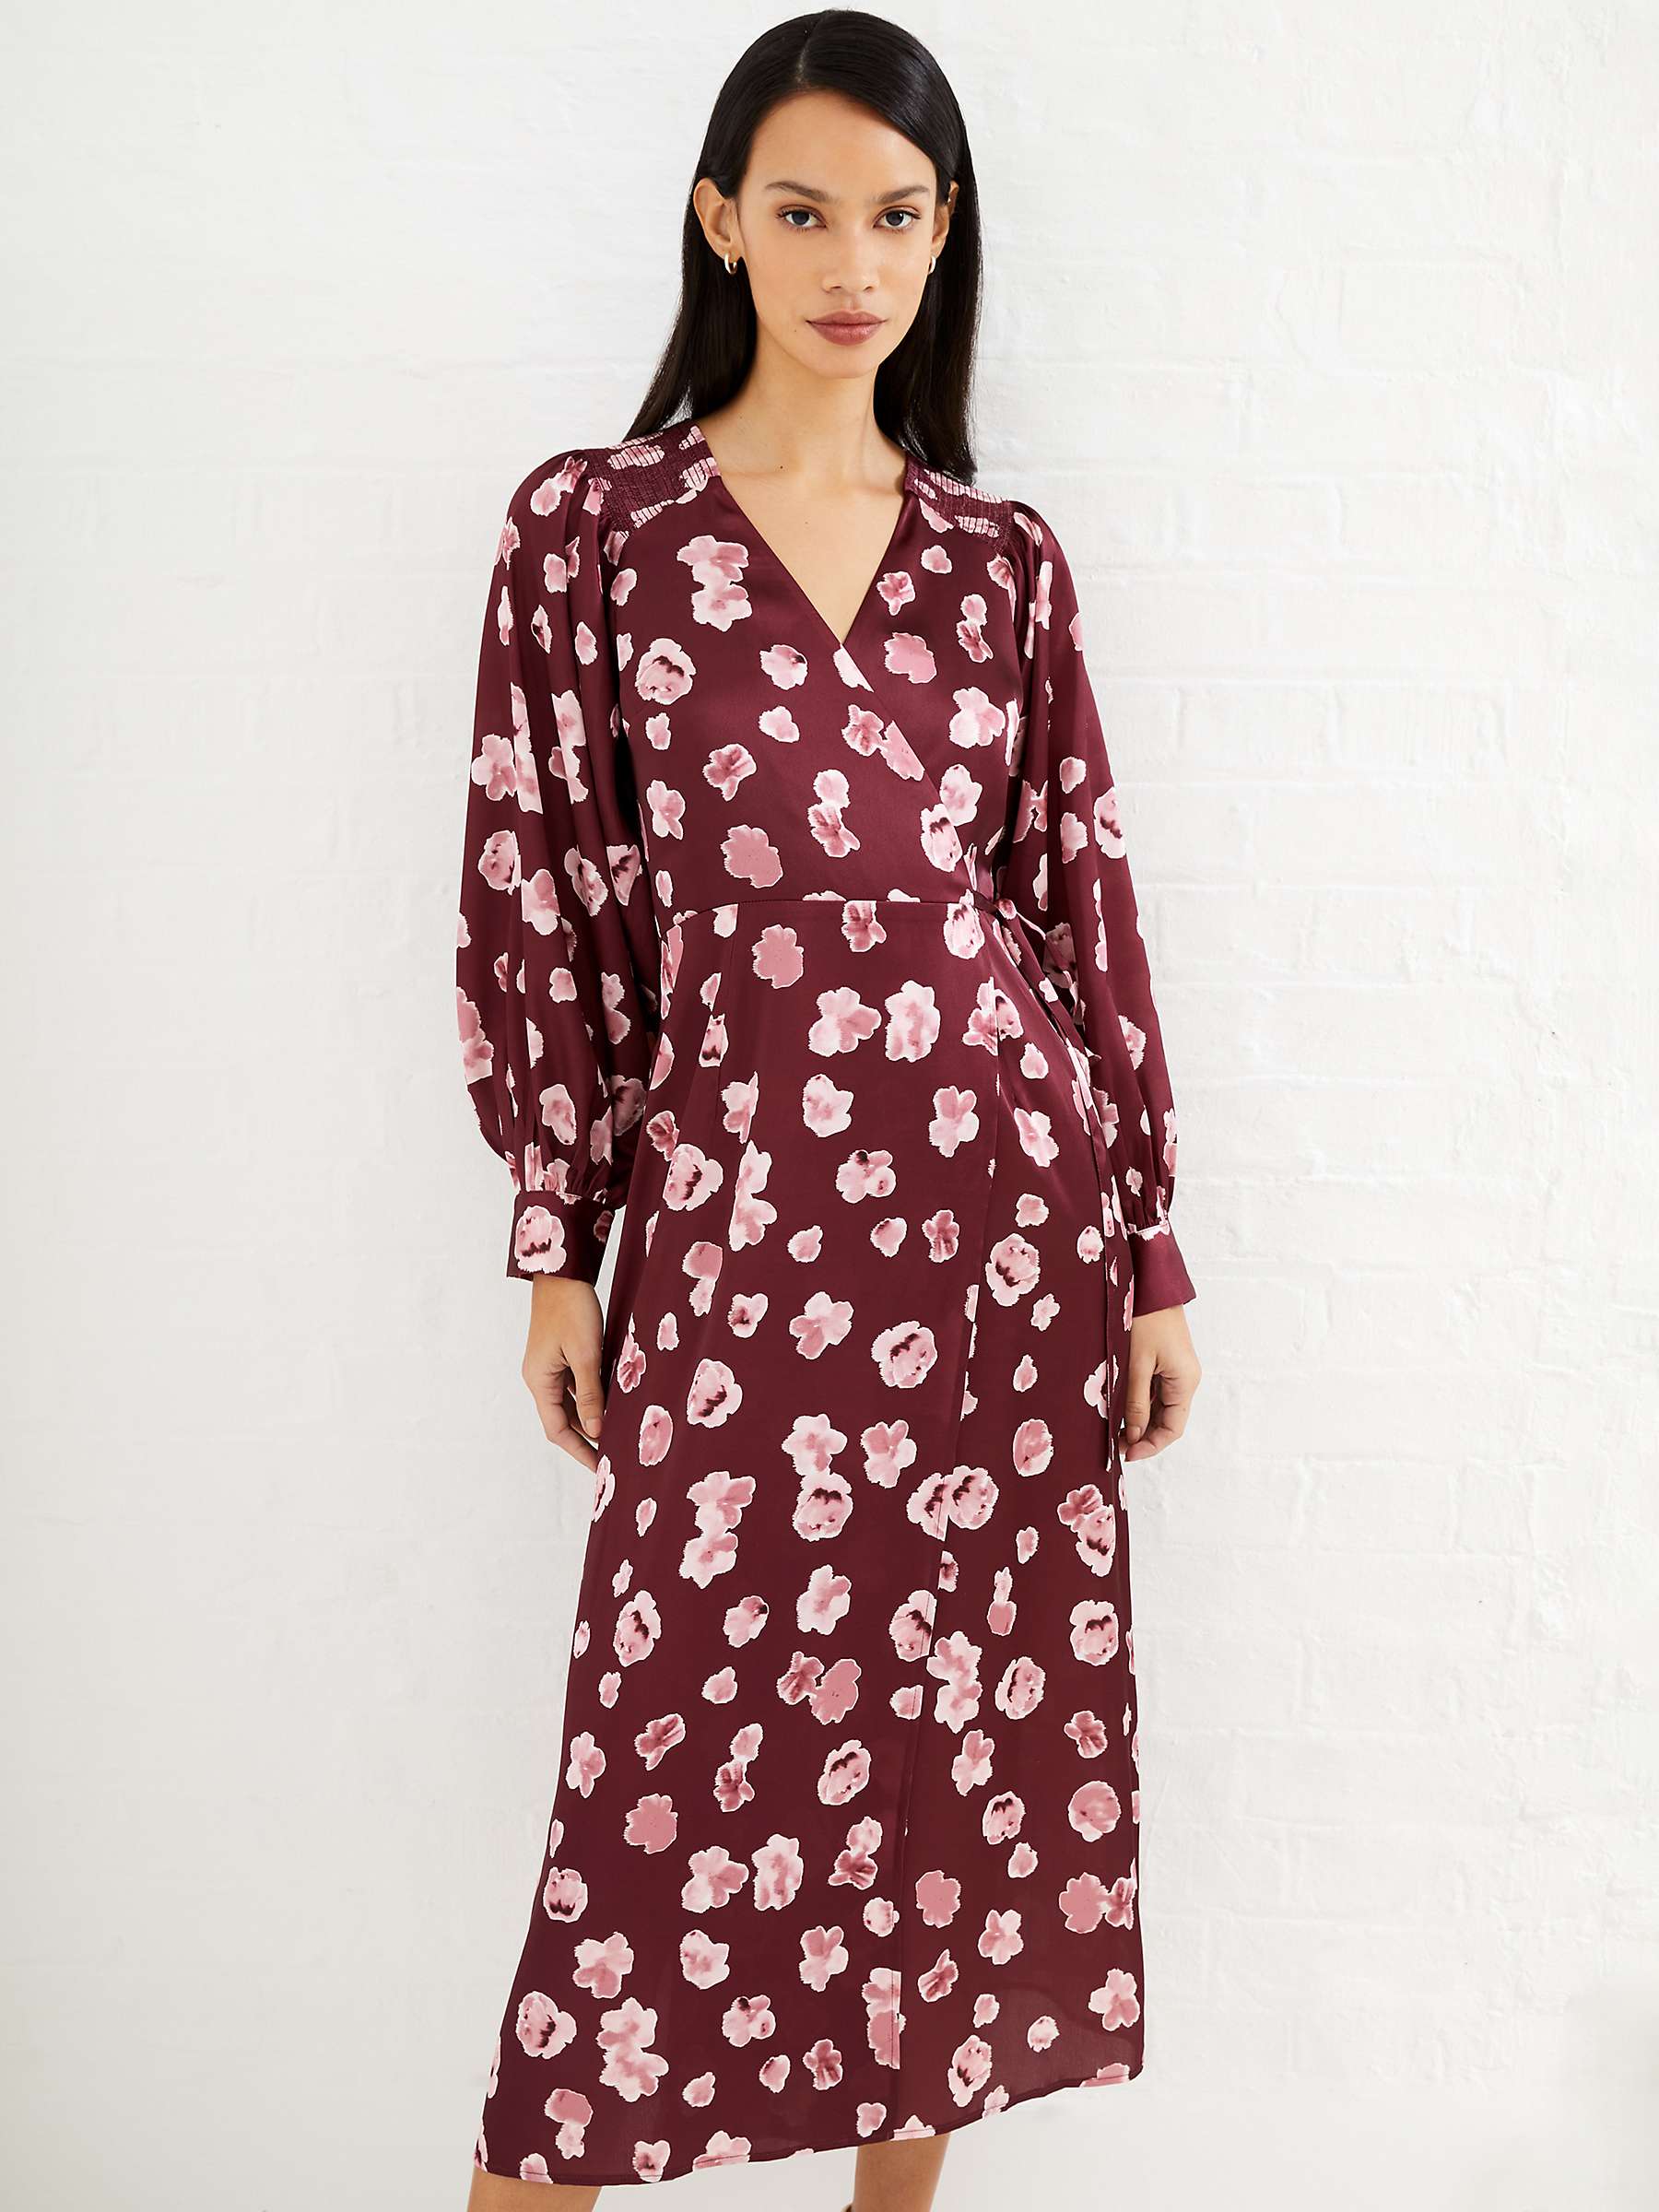 Buy French Connection Bronwen Floral Satin Wrap Dress, Chocolate Truffle Online at johnlewis.com